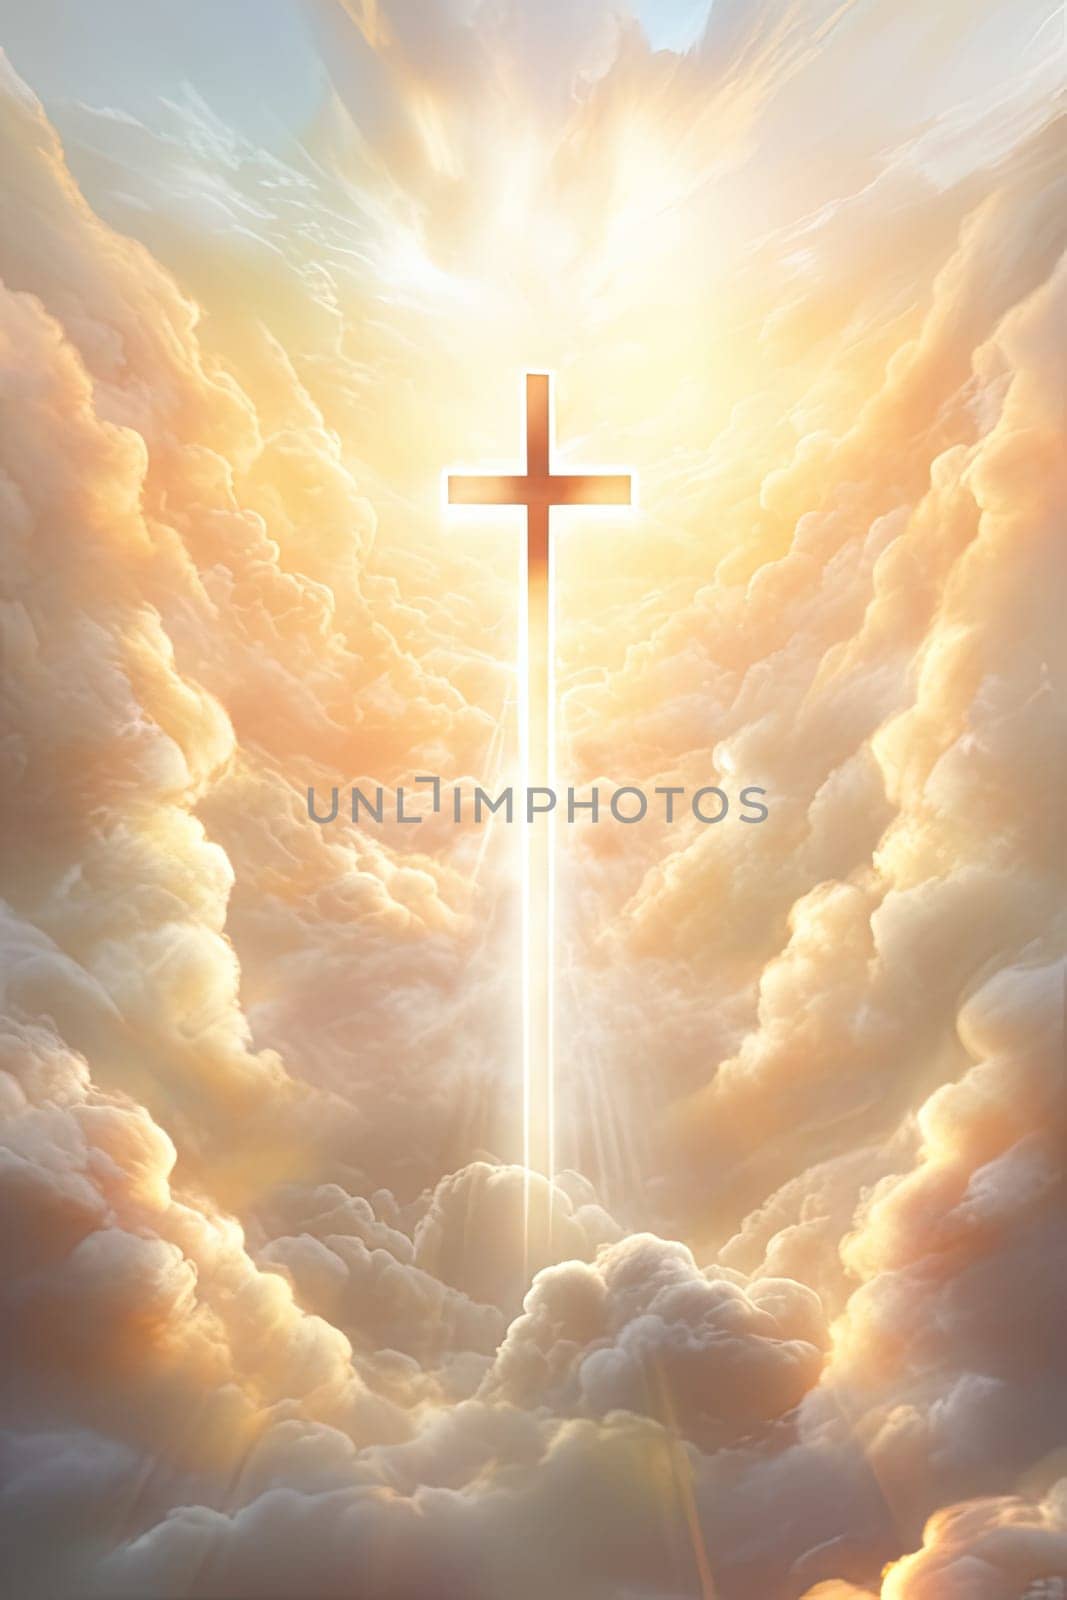 Christian cross and divine light through the clouds around cross in sky, enchanting light and peach fuzz tones on heaven, religion concept, vertical image